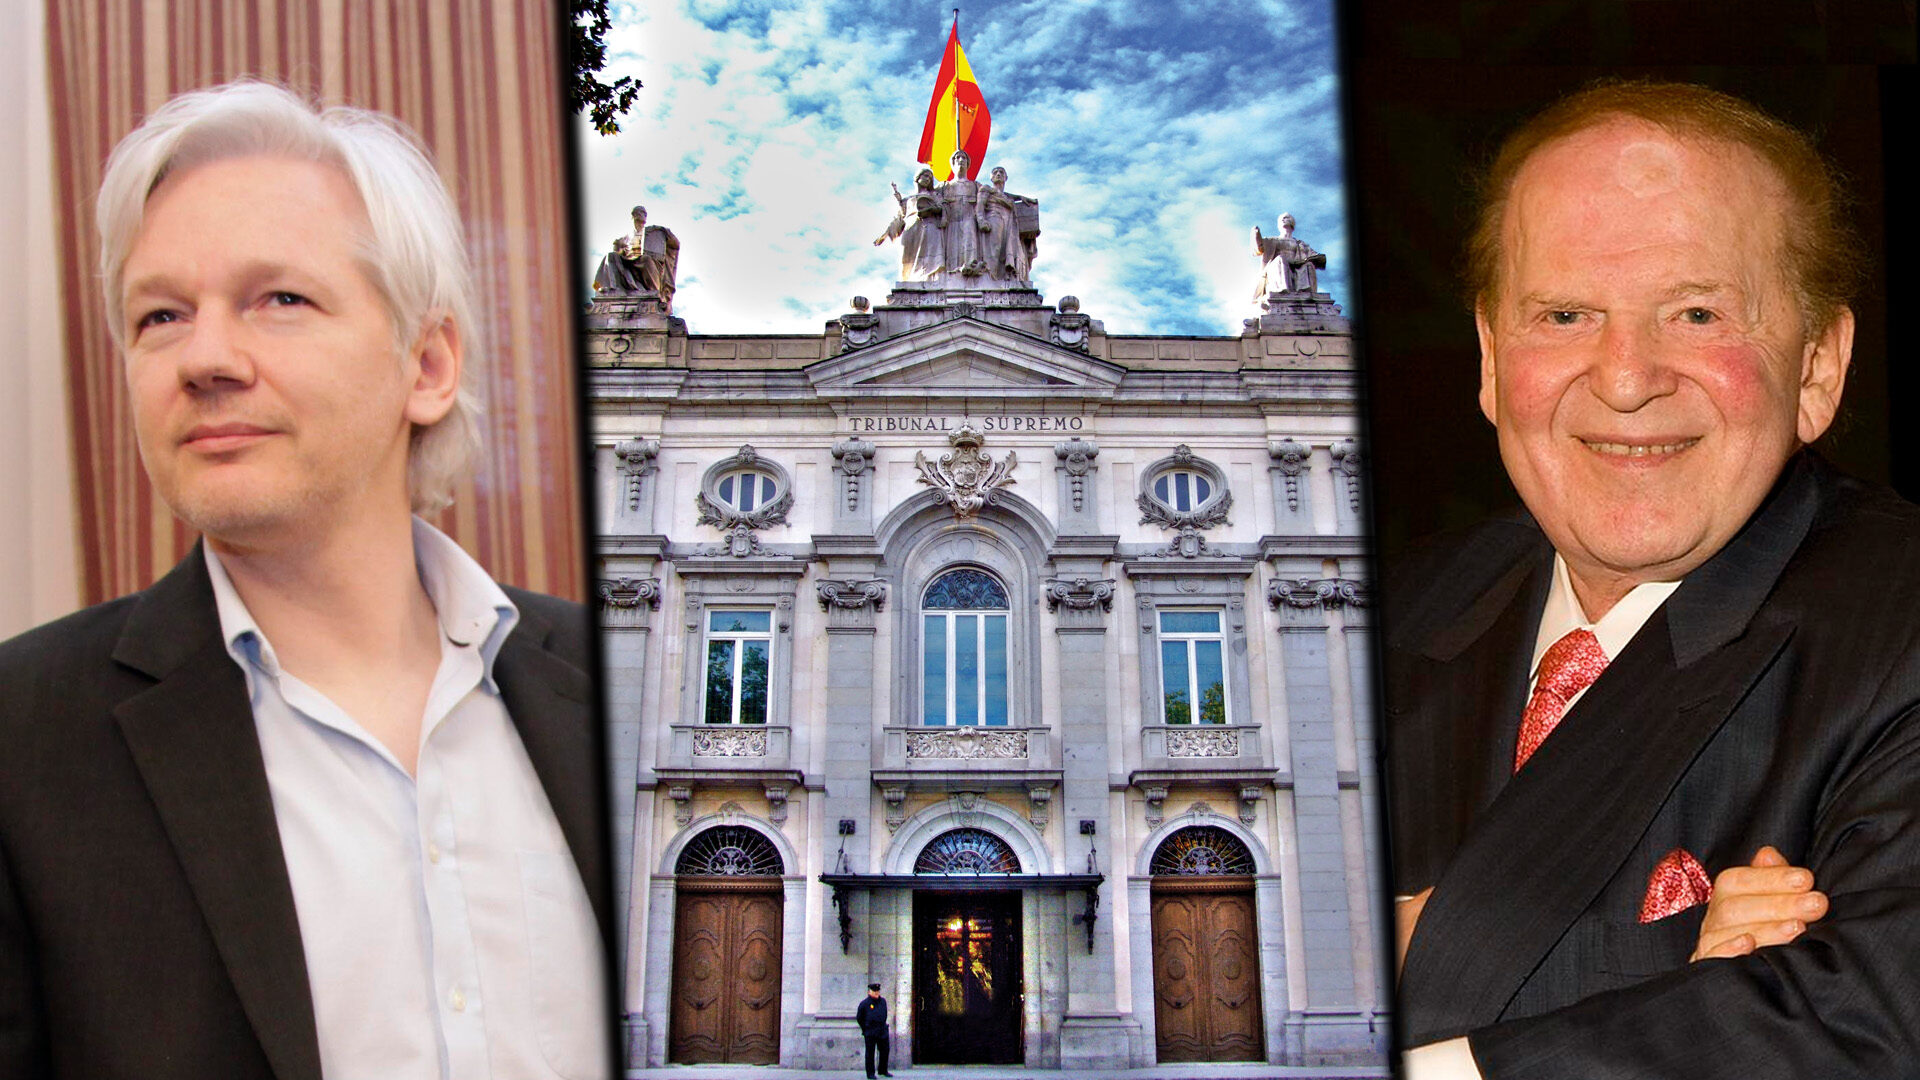 assange adelson spanish trial spying